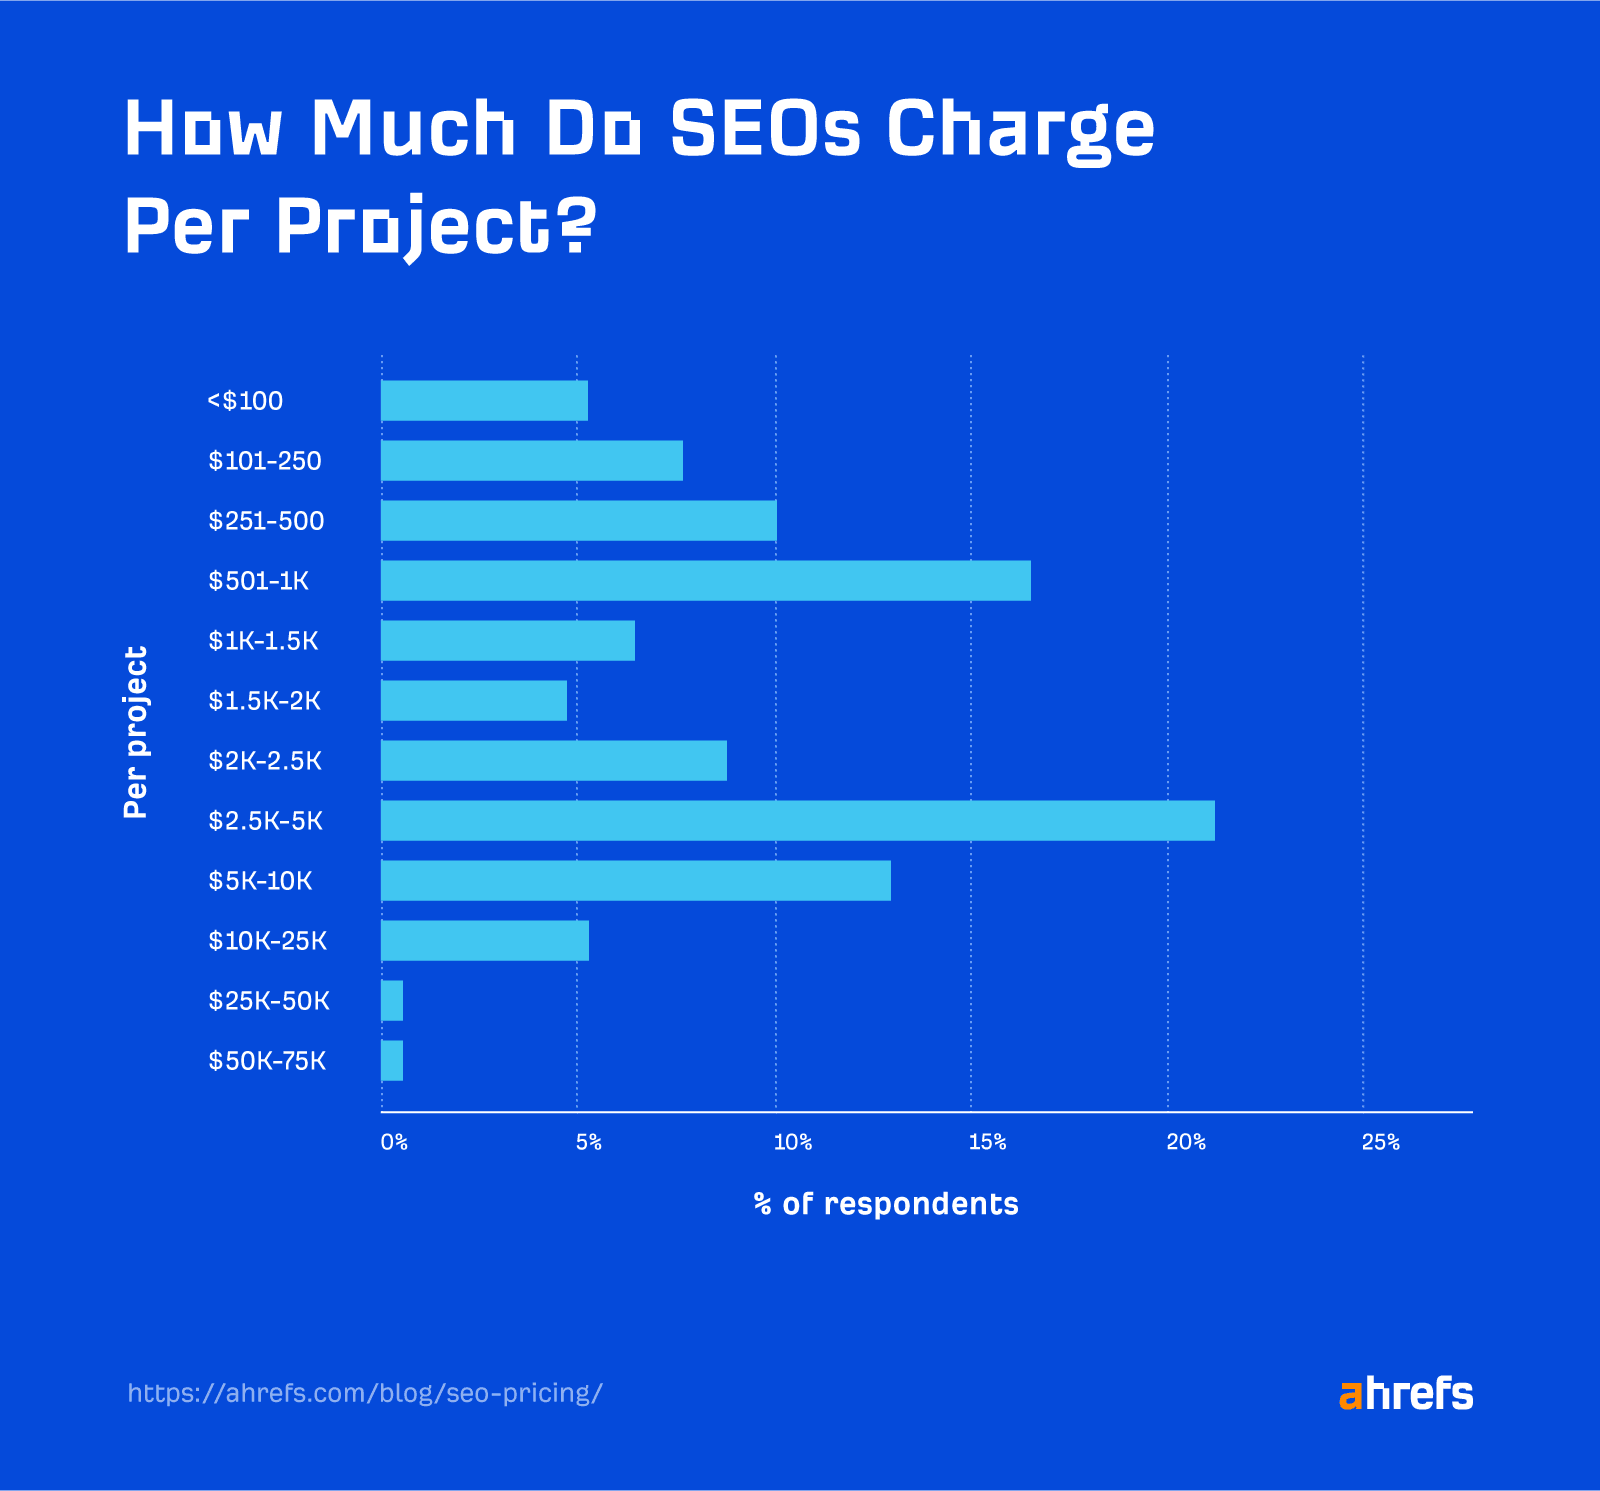 A bar chart displaying the distribution of per project rates charged by SEO professionals.